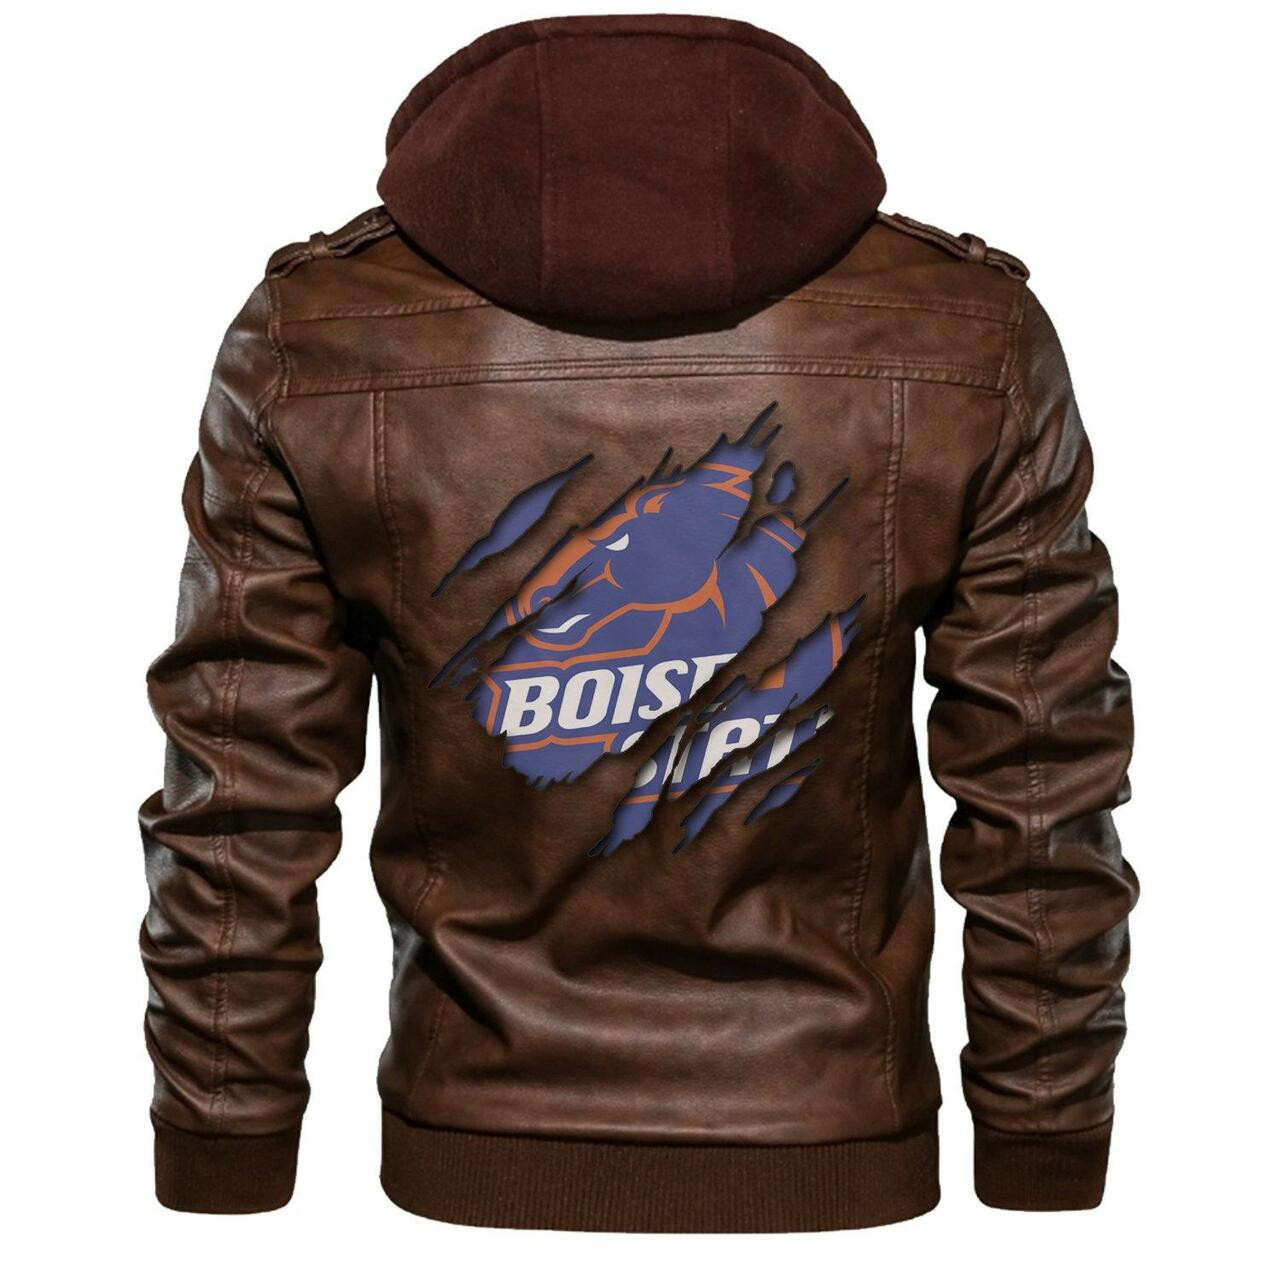 Our store has all of the latest leather jacket 188